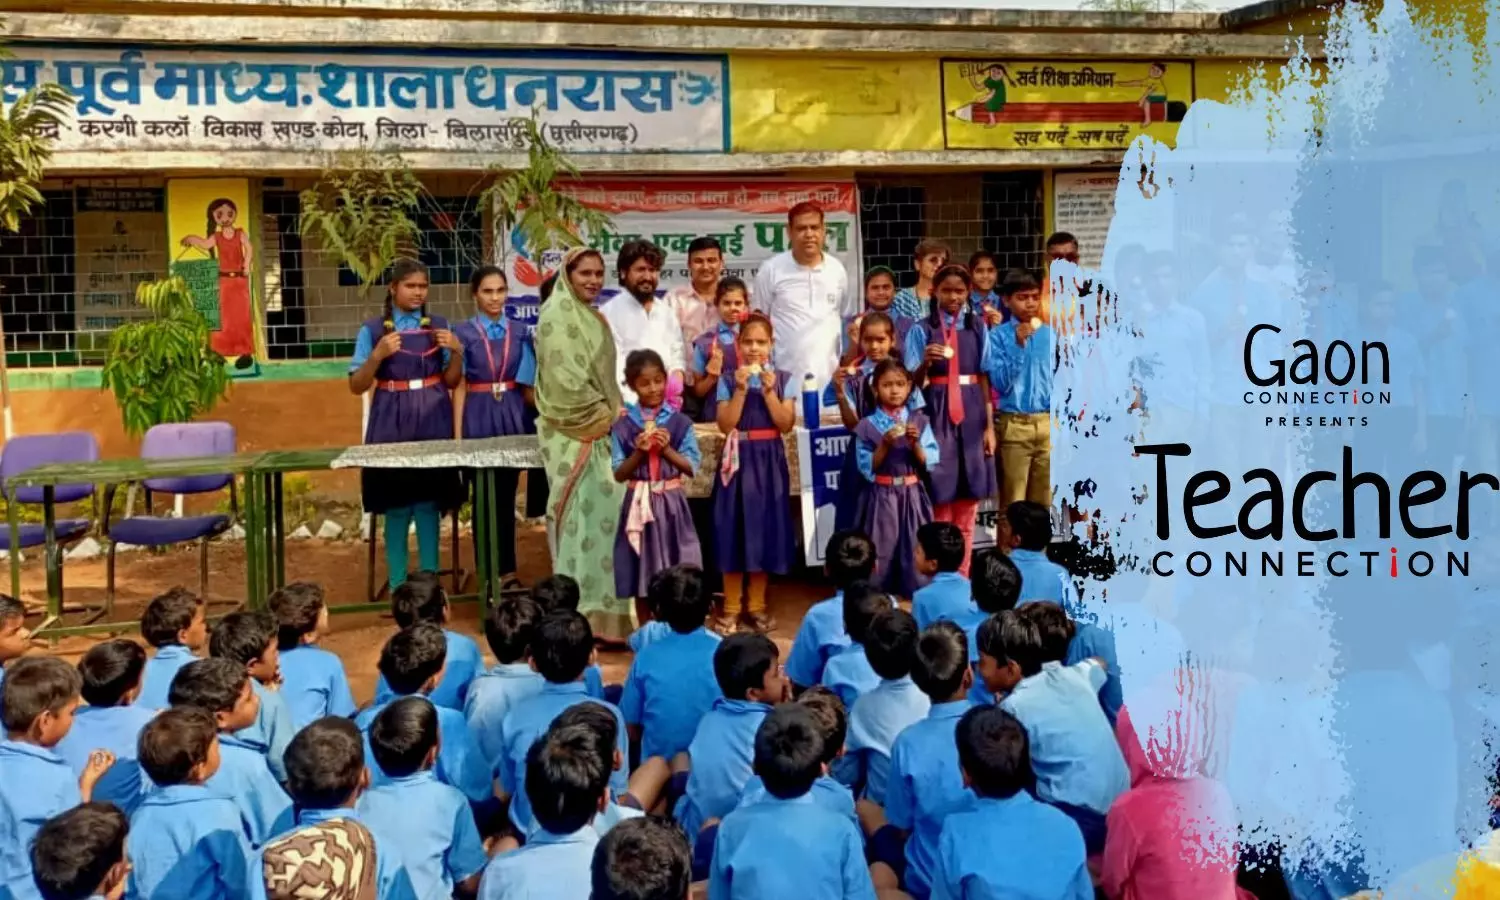 A black umbrella, an LED TV and bagless education — a primary govt teacher in Bilaspur drives change